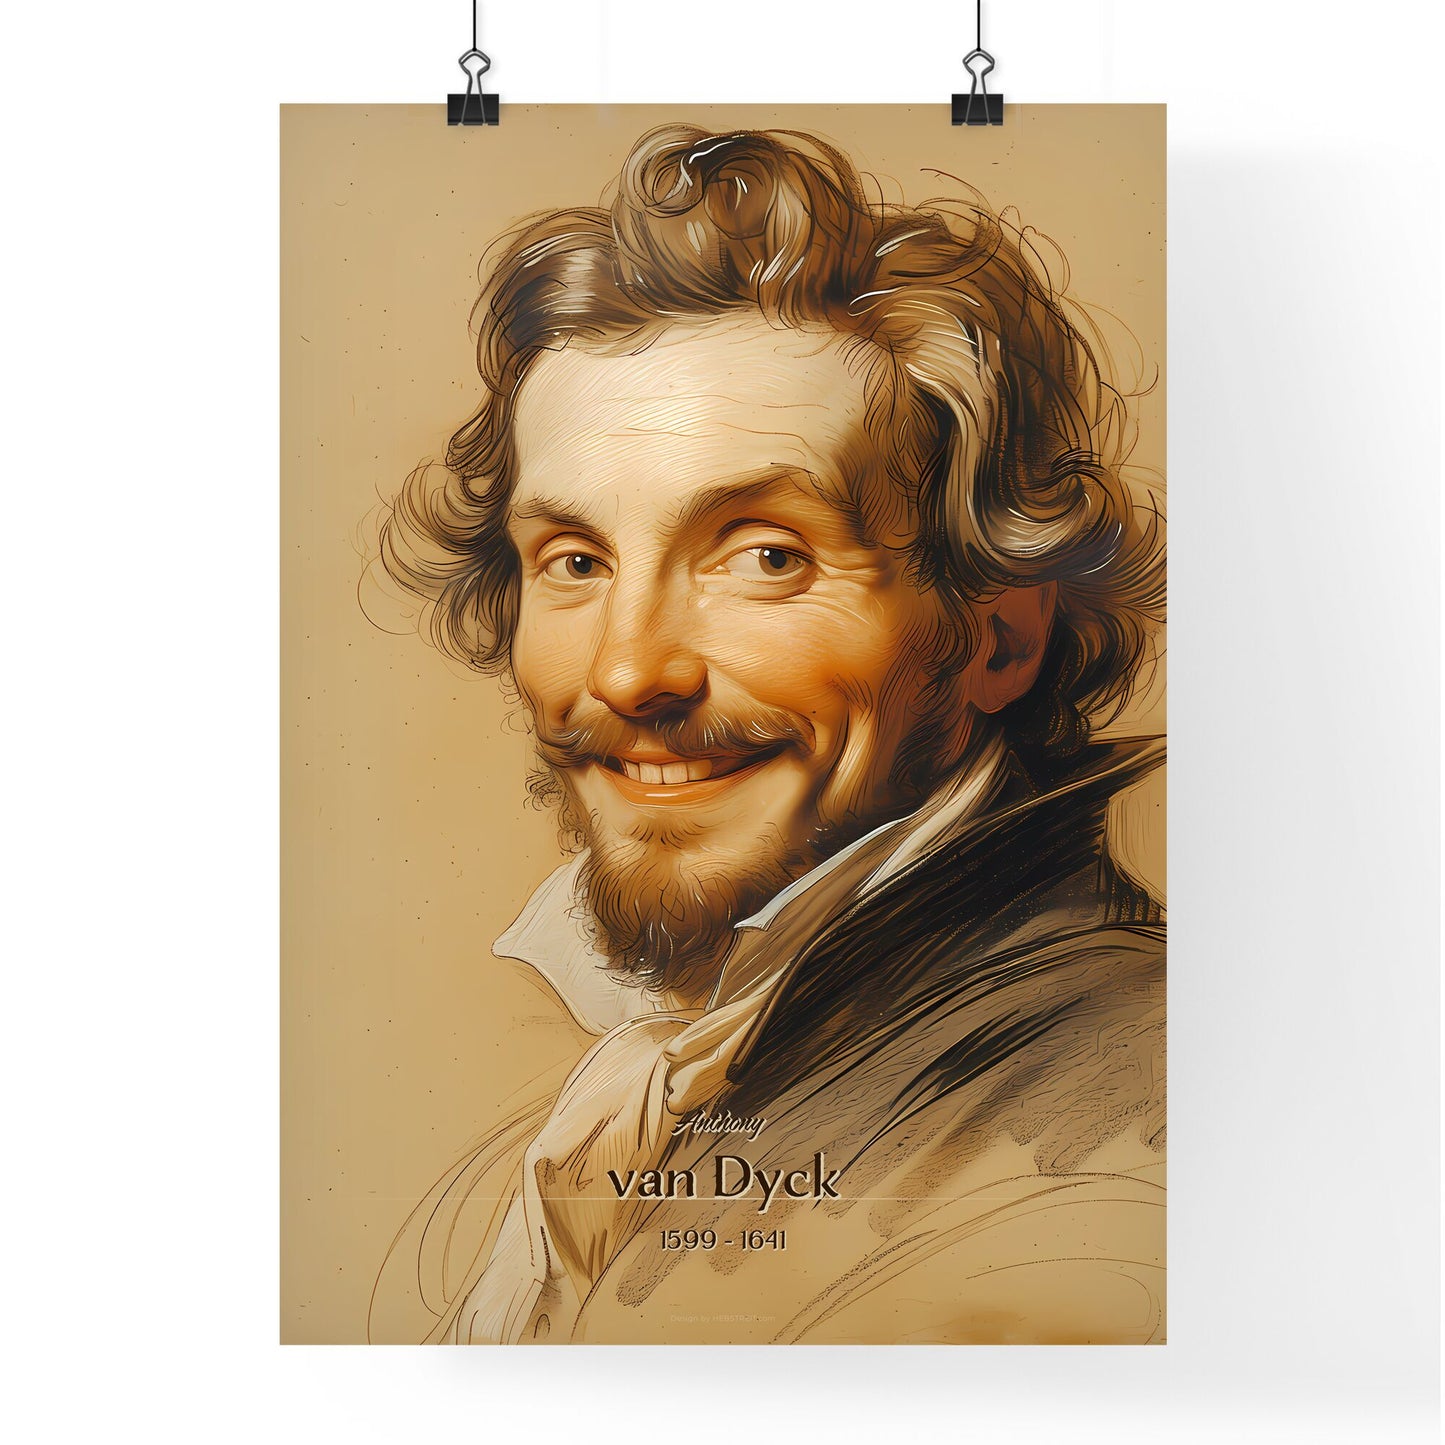 Anthony, van Dyck, 1599 - 1641, A Poster of a man with curly hair and beard smiling Default Title